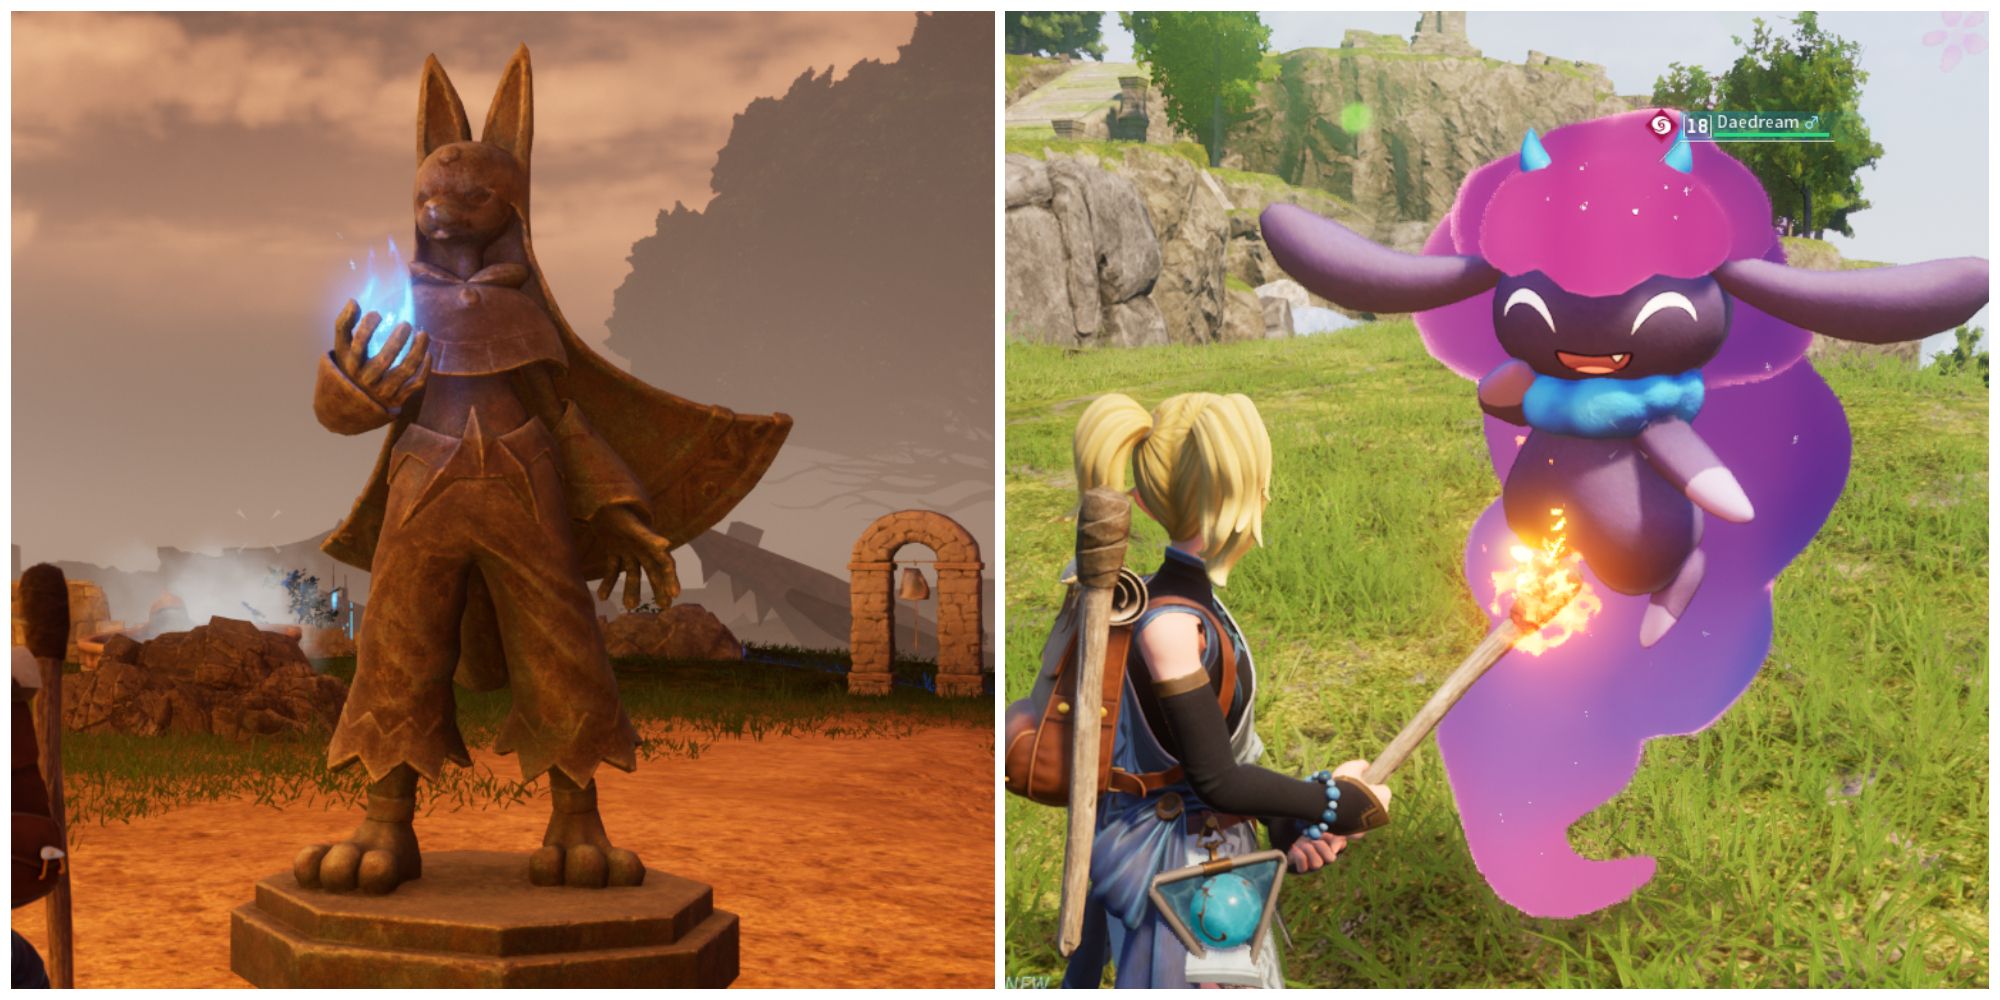 Split image of the Statue of Power and the Pal Daedream after being pet in Palworld